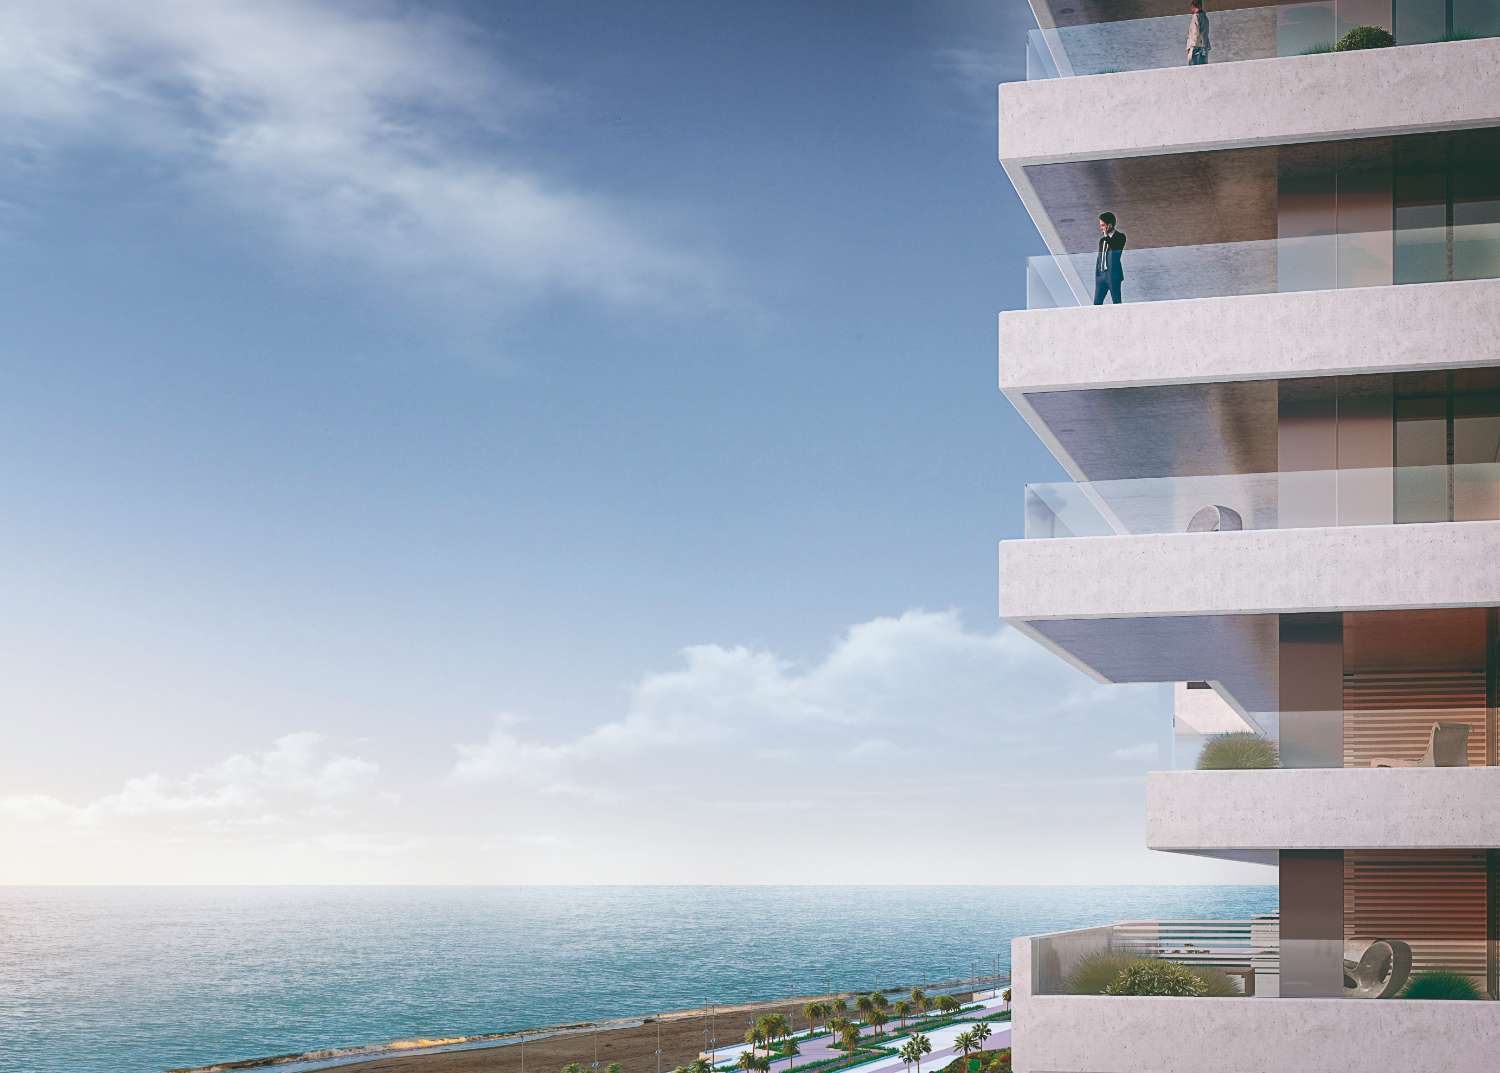 LUXURY APARTMENTS WITH VIEWS OF THE MEDITERRANEAN SEA LAST UNITS!